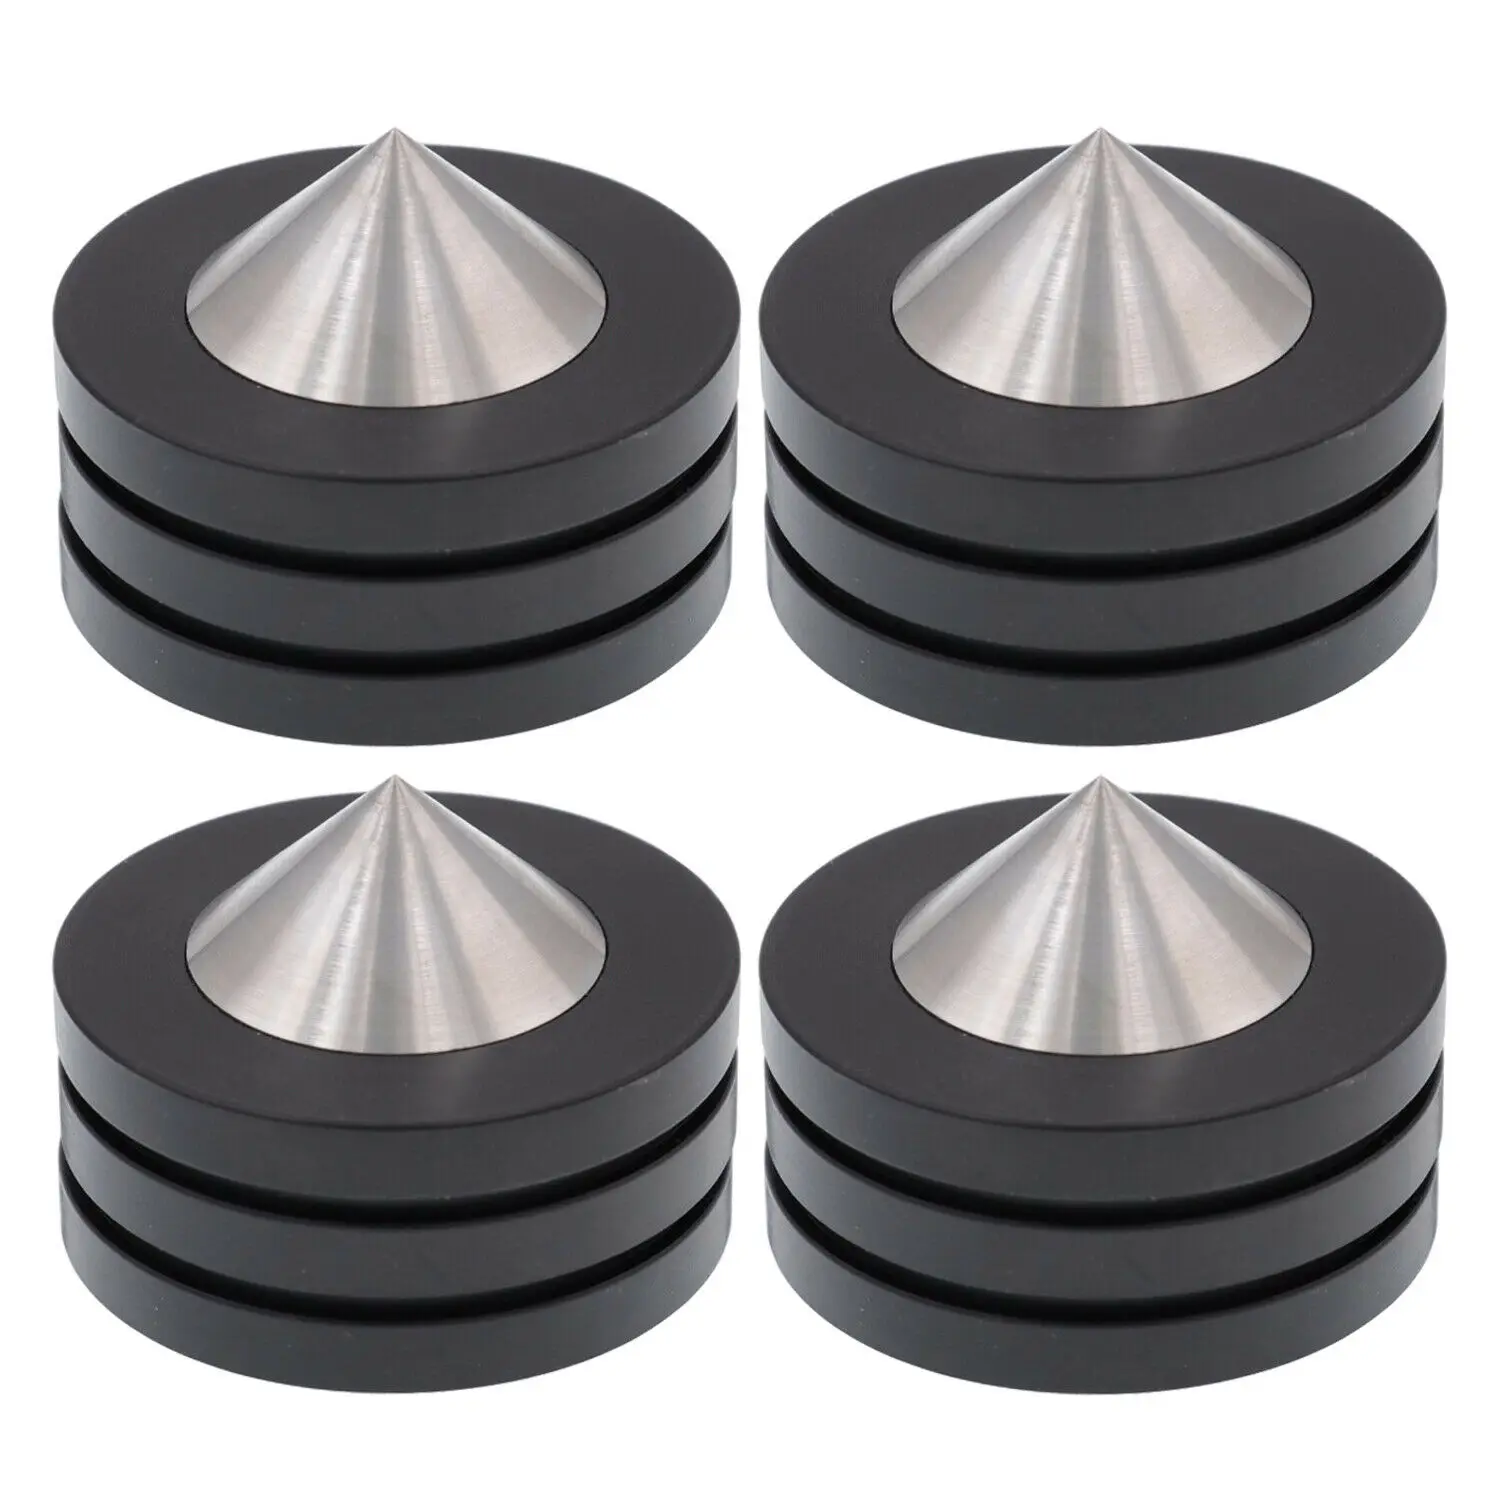 4PCS AUDIO FEET 49x36mm 304 Stainless Steel Graphite Speaker Cabine Amplifier Turntable CD Player Radio DAC Isolation Spike Base